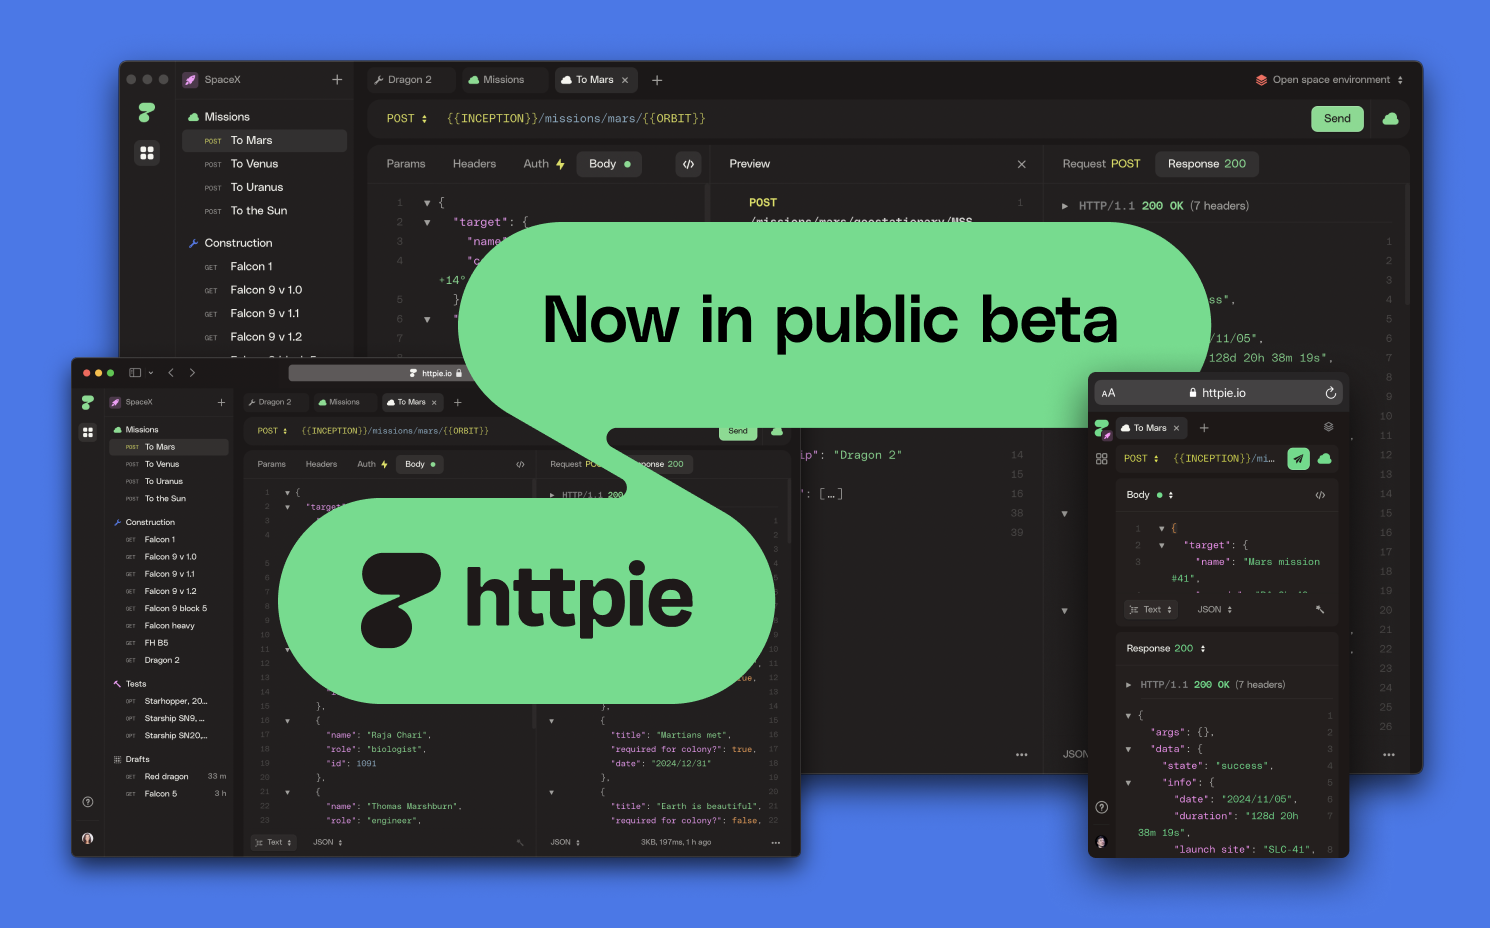 Public beta — you can use HTTPie for Web & Desktop today